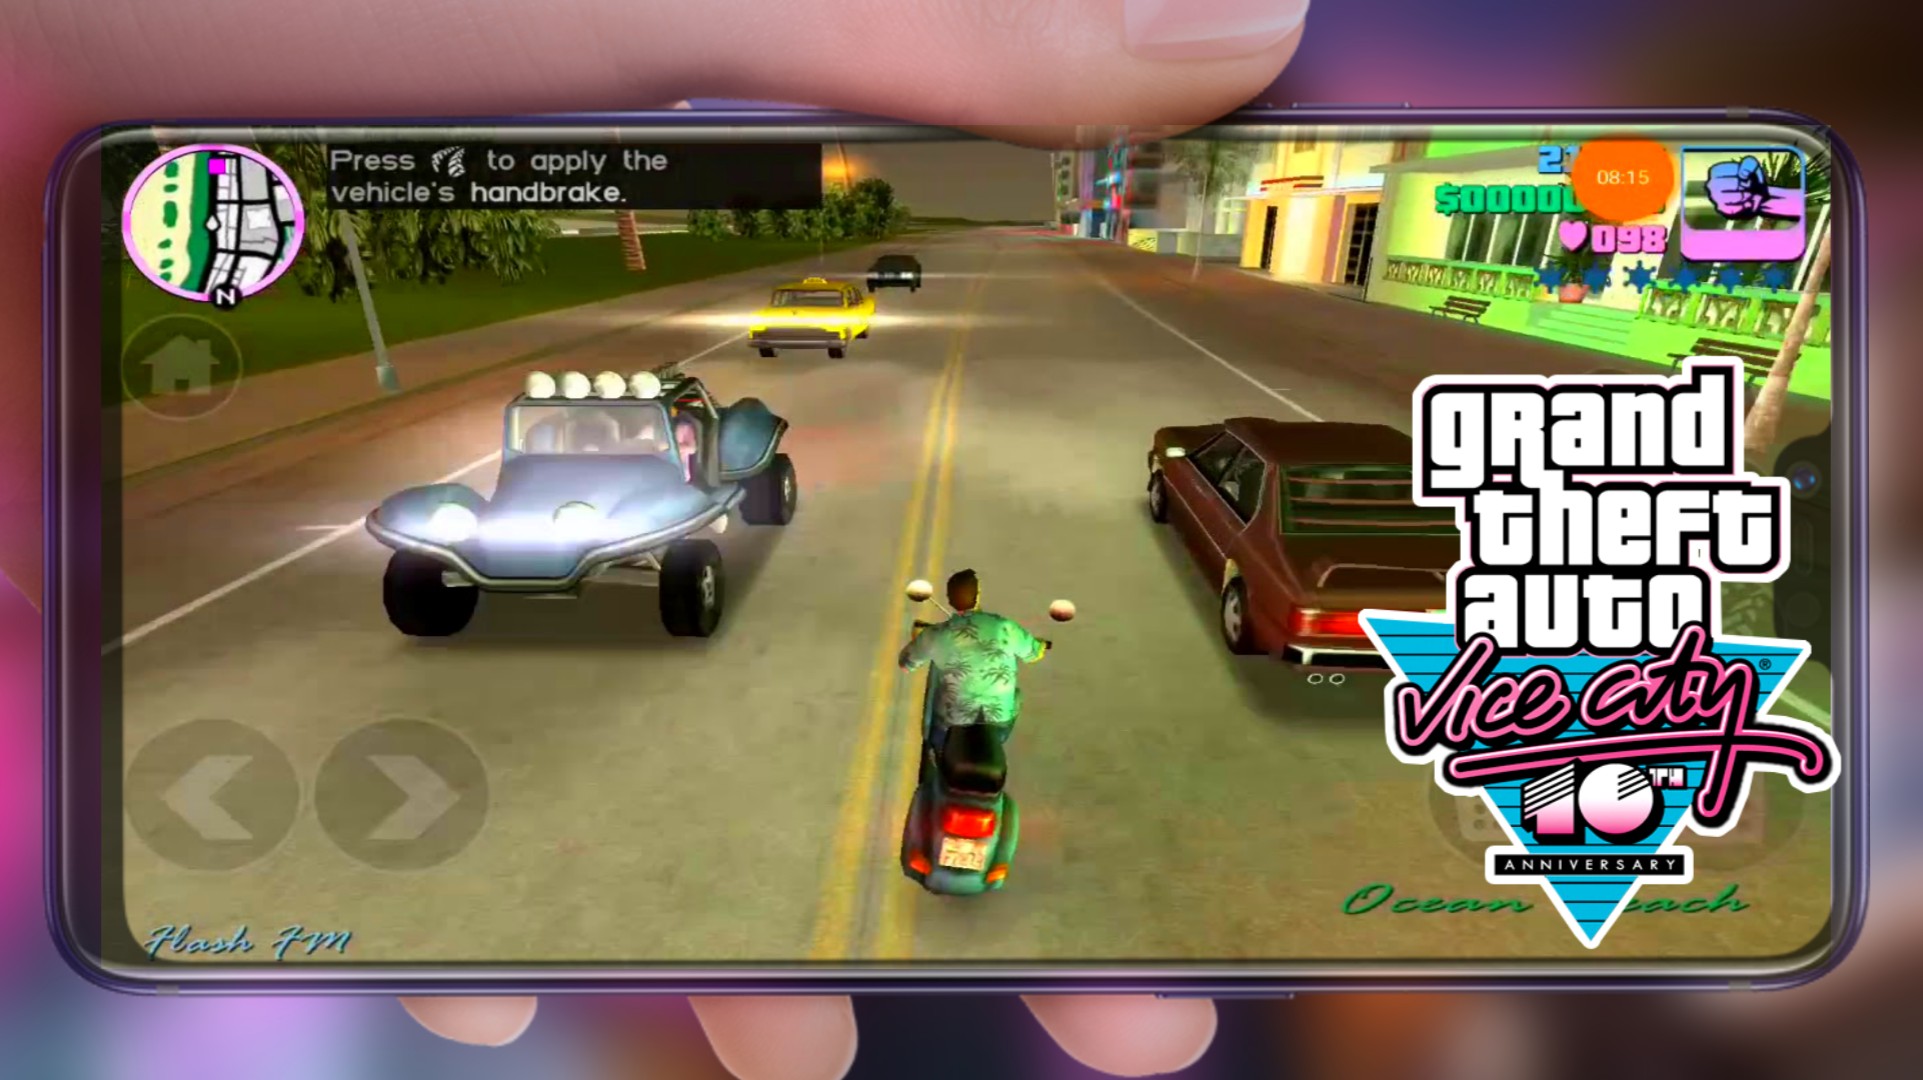 ГТА вай Сити 2005. GTA vice City stories APK OBB download for Android. GTA vice City Underground 2. GTA vice City Lite APK+OBB+Cleo download Android 5.1 highly compr.